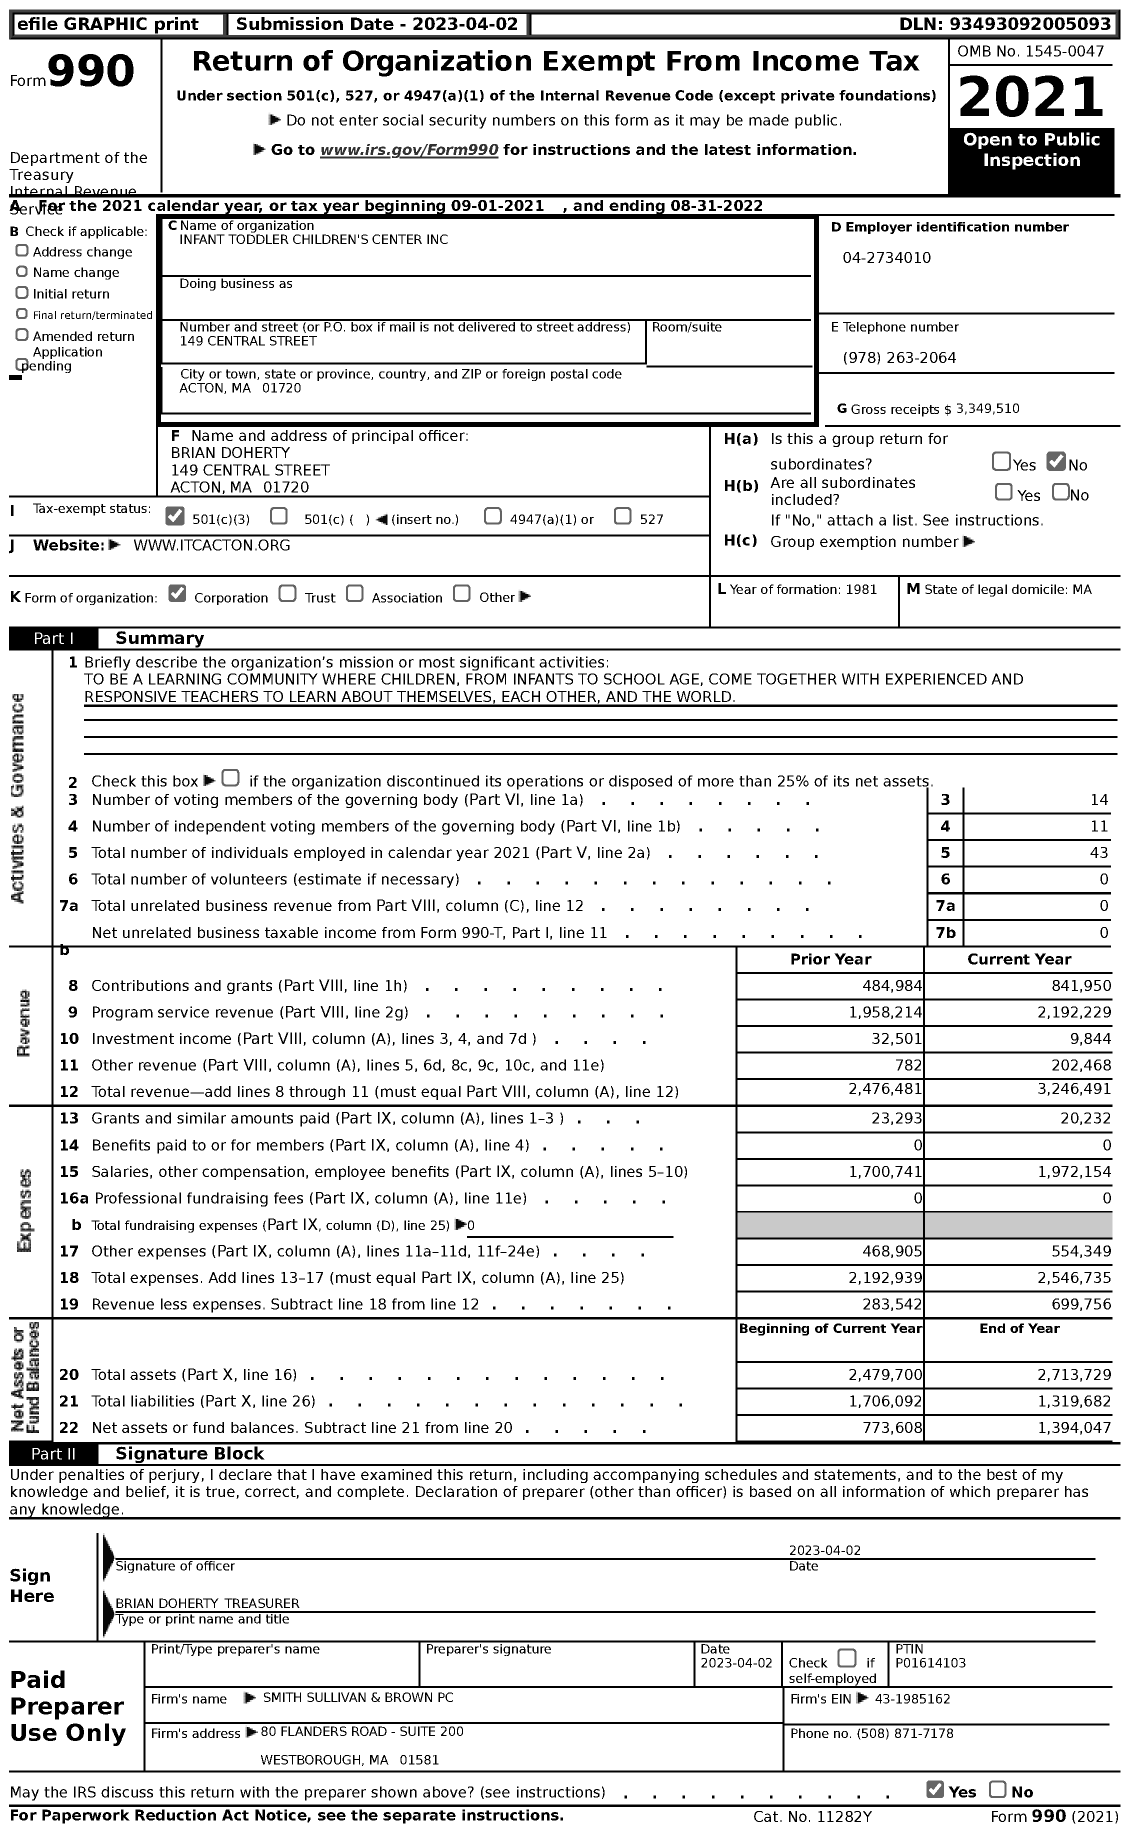 Image of first page of 2021 Form 990 for Infant Toddler Children's Center (ITC)